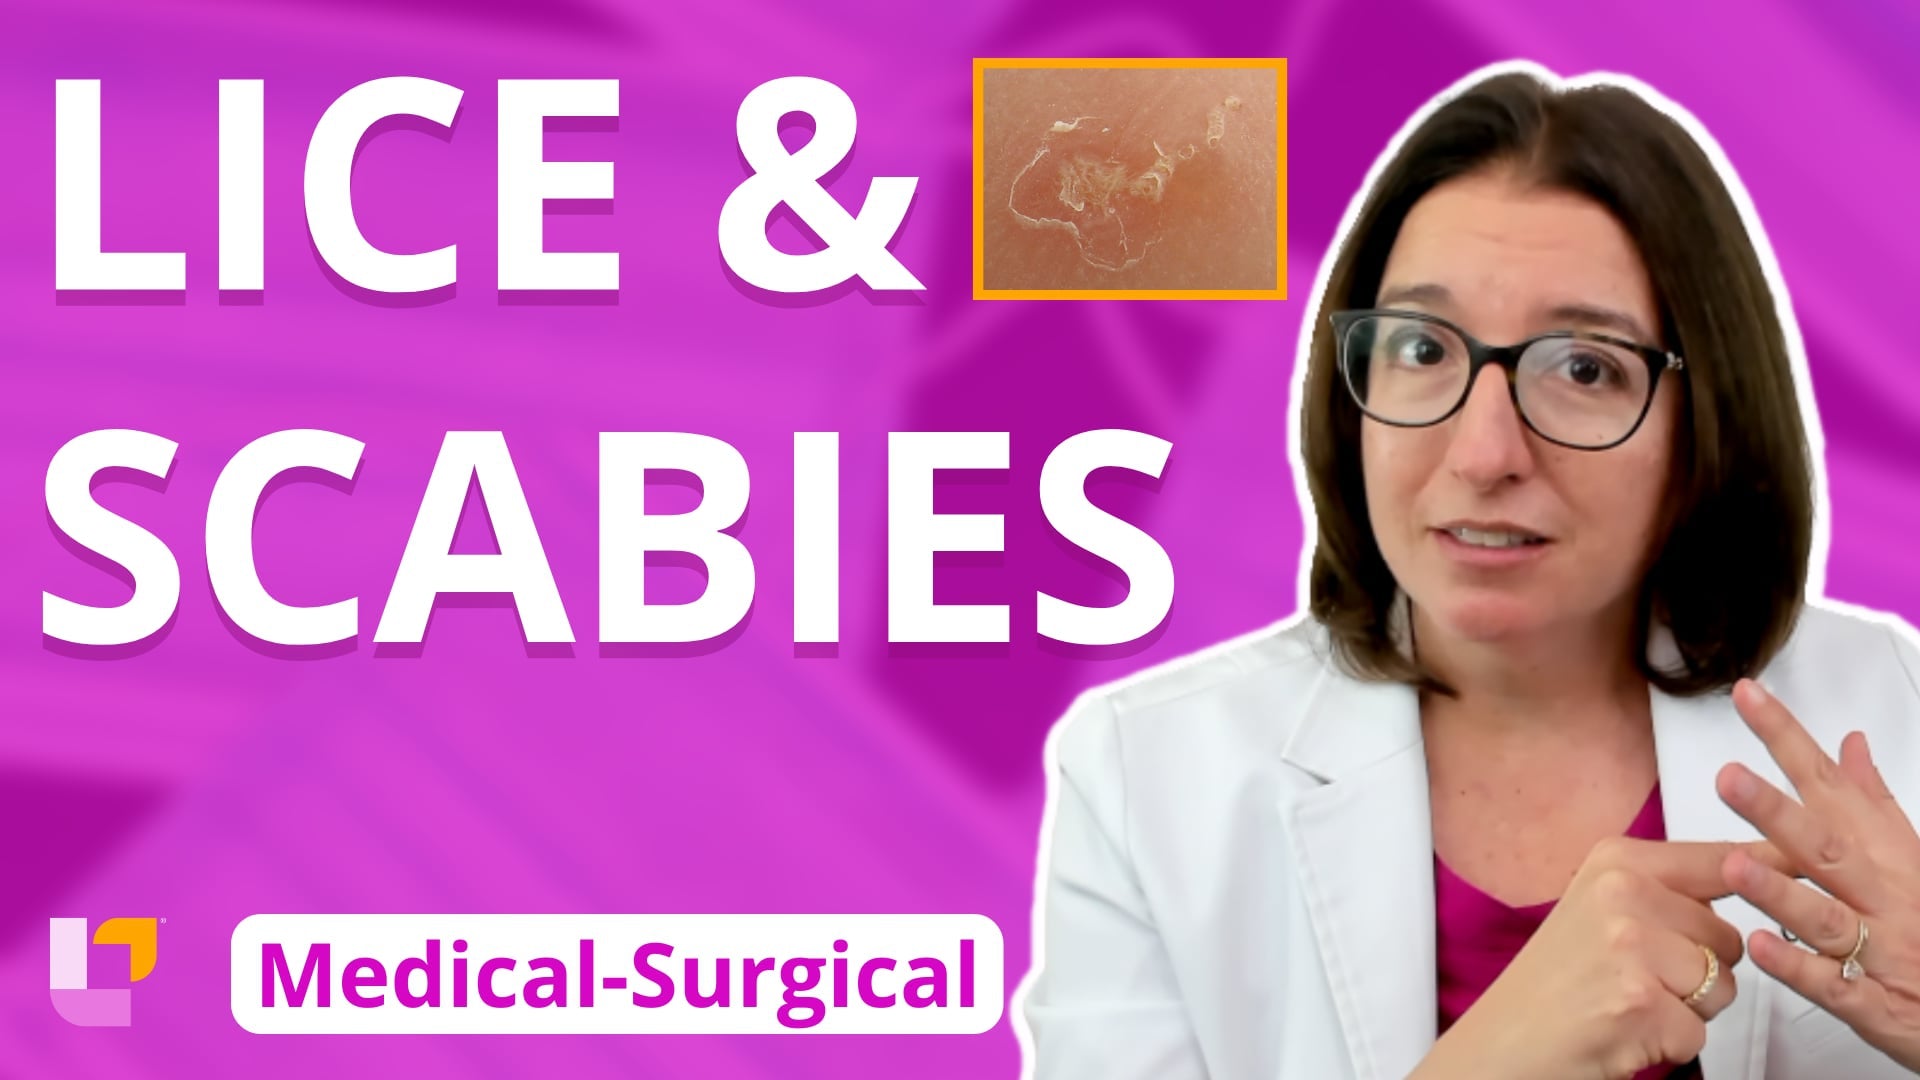 Med-Surg - Integumentary System, part 10: Lice & Scabies - LevelUpRN